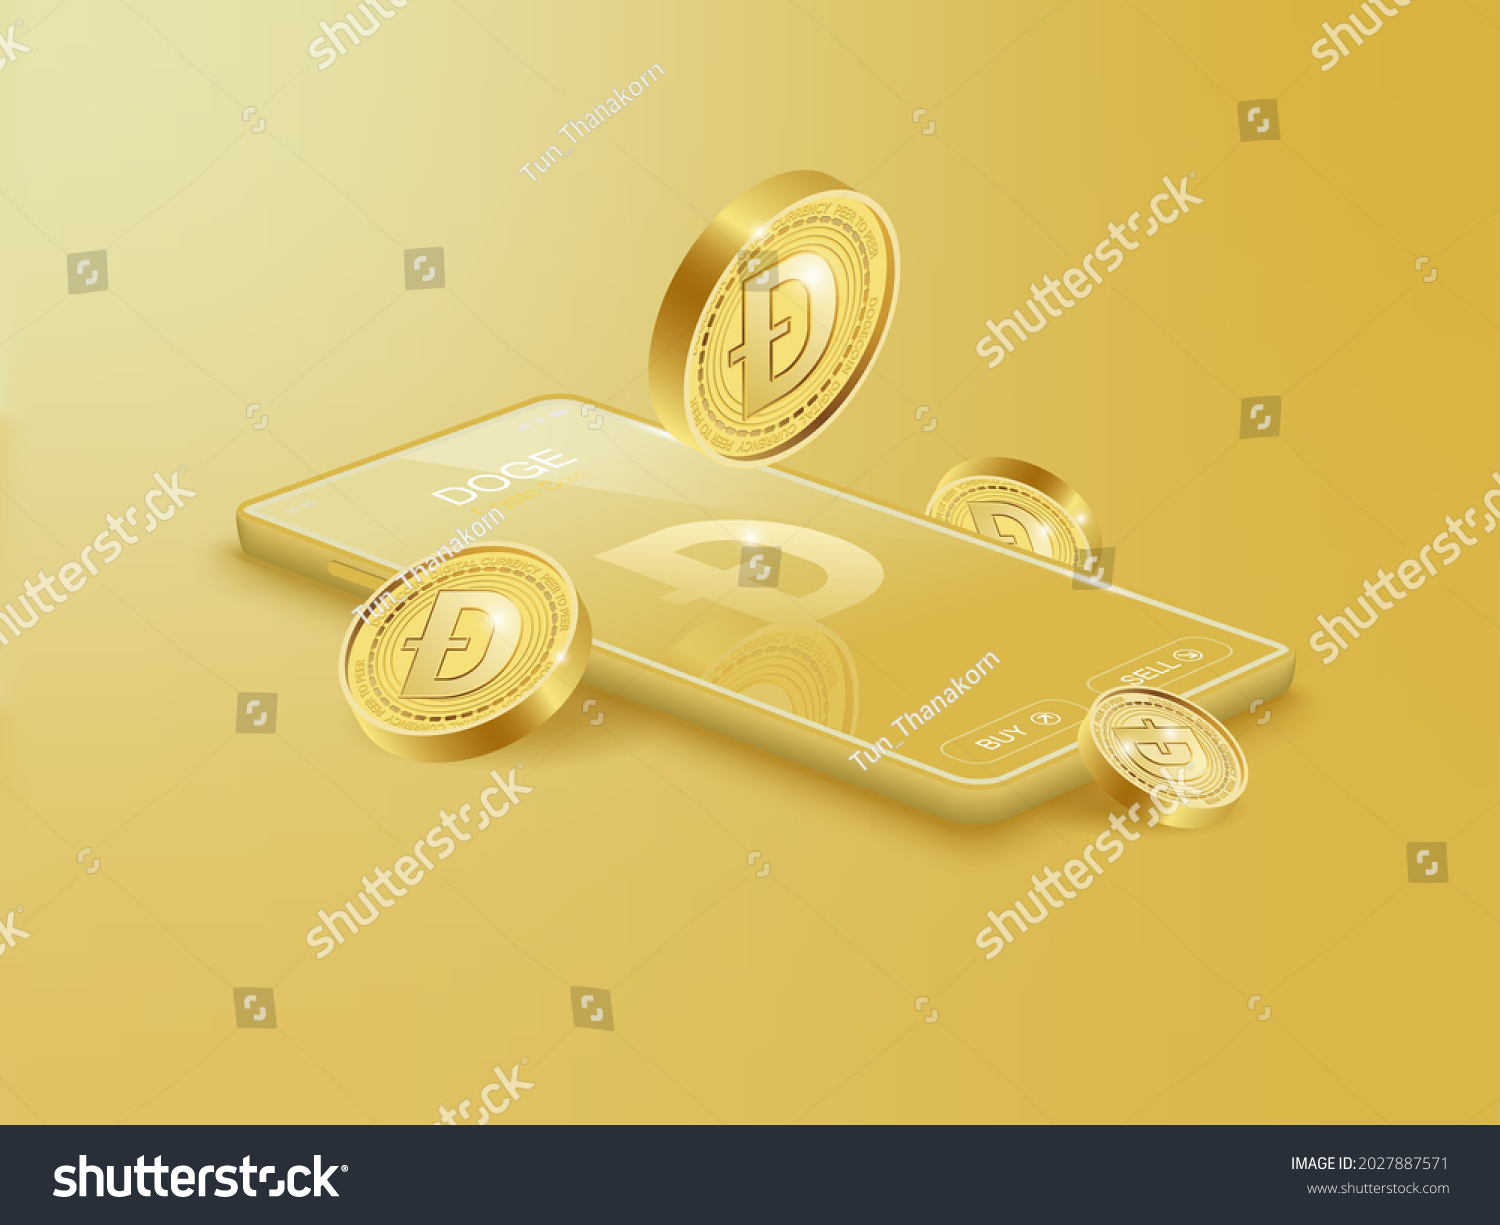 SVG of Trade Dogecoin (DOGE) on mobile through the system Cryptocurrency. Perspective Illustration about Crypto Coins. svg